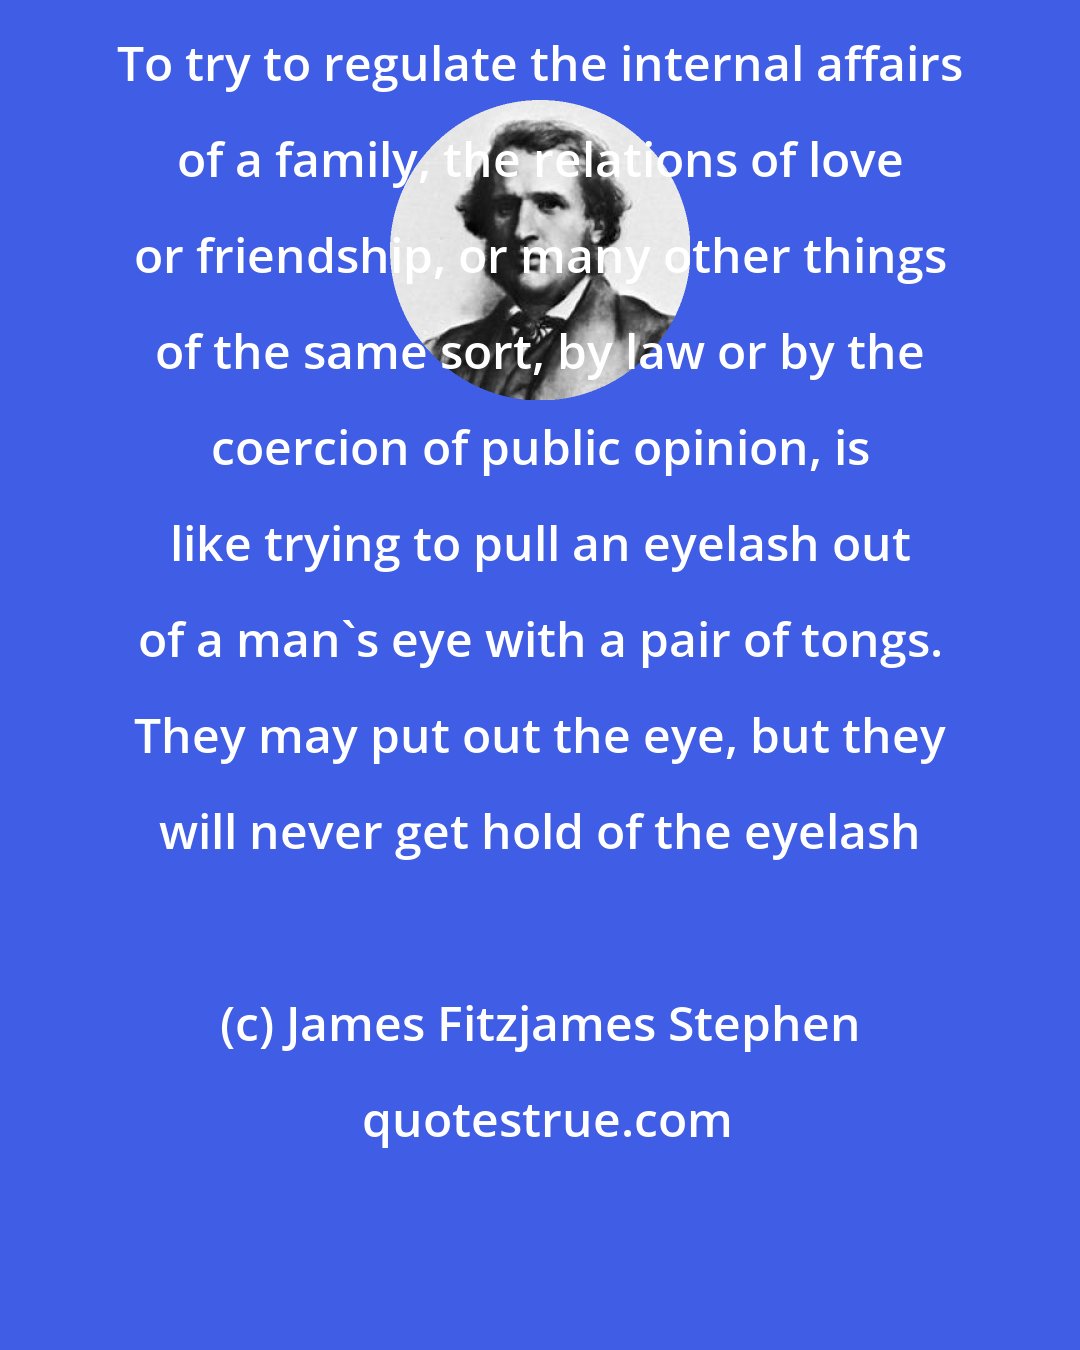 James Fitzjames Stephen: To try to regulate the internal affairs of a family, the relations of love or friendship, or many other things of the same sort, by law or by the coercion of public opinion, is like trying to pull an eyelash out of a man's eye with a pair of tongs. They may put out the eye, but they will never get hold of the eyelash